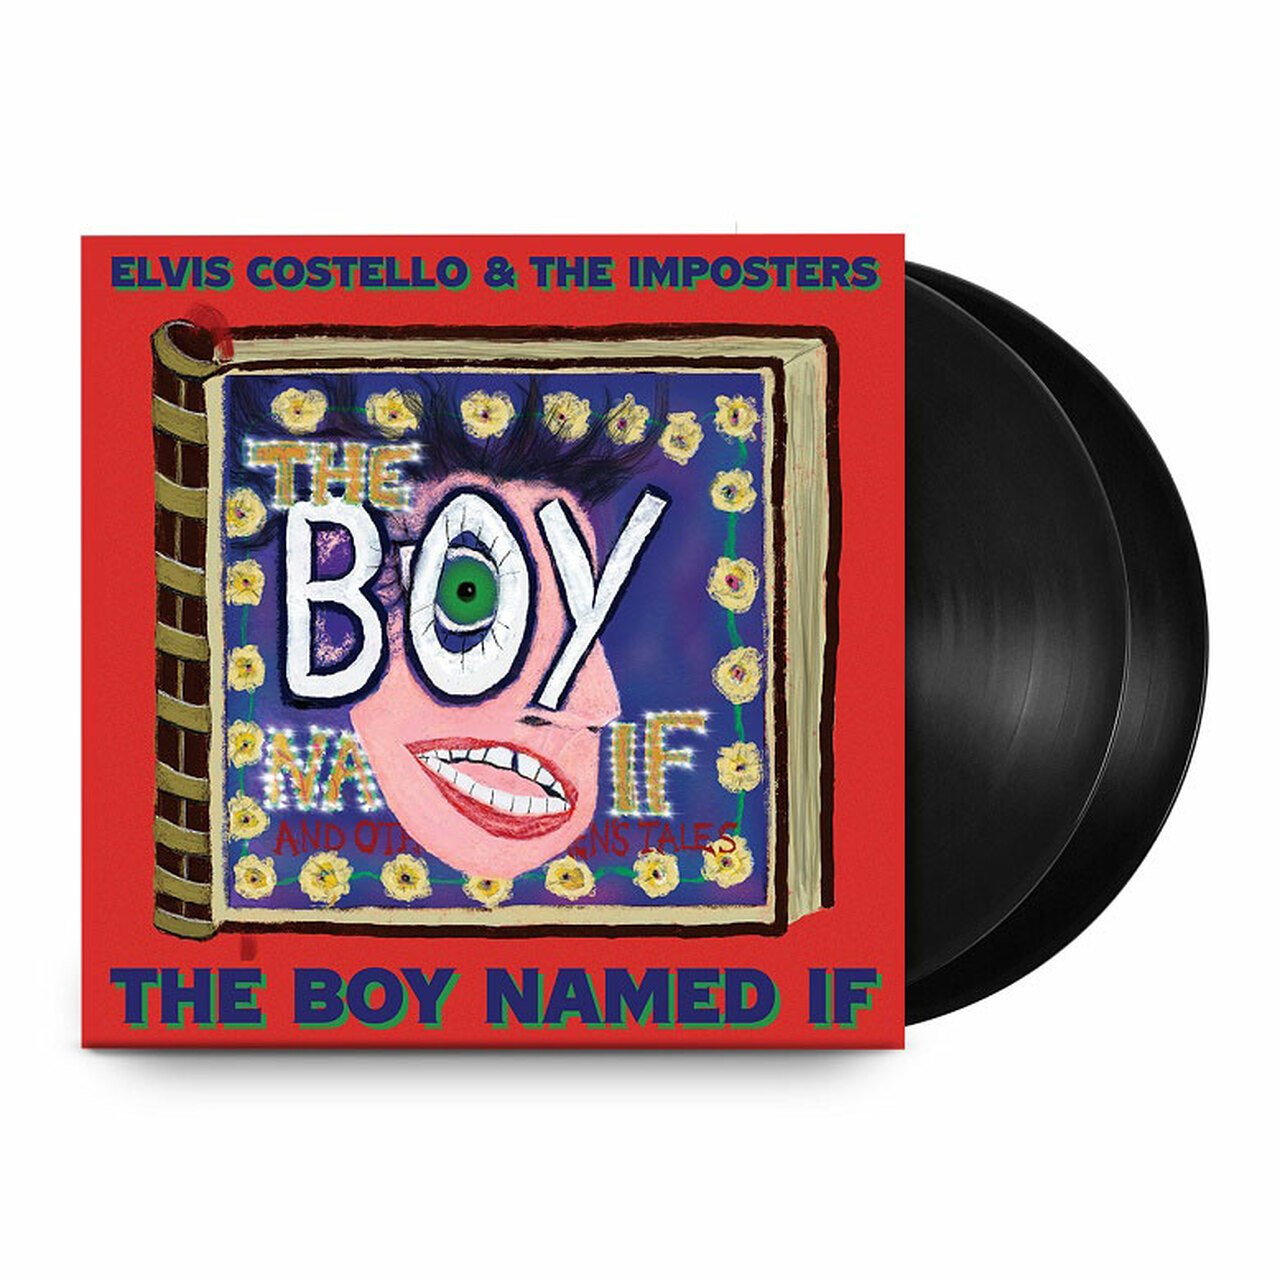 ELVIS COSTELLO & THE IMPOSTERS 'THE BOY NAMED IF' 2LP